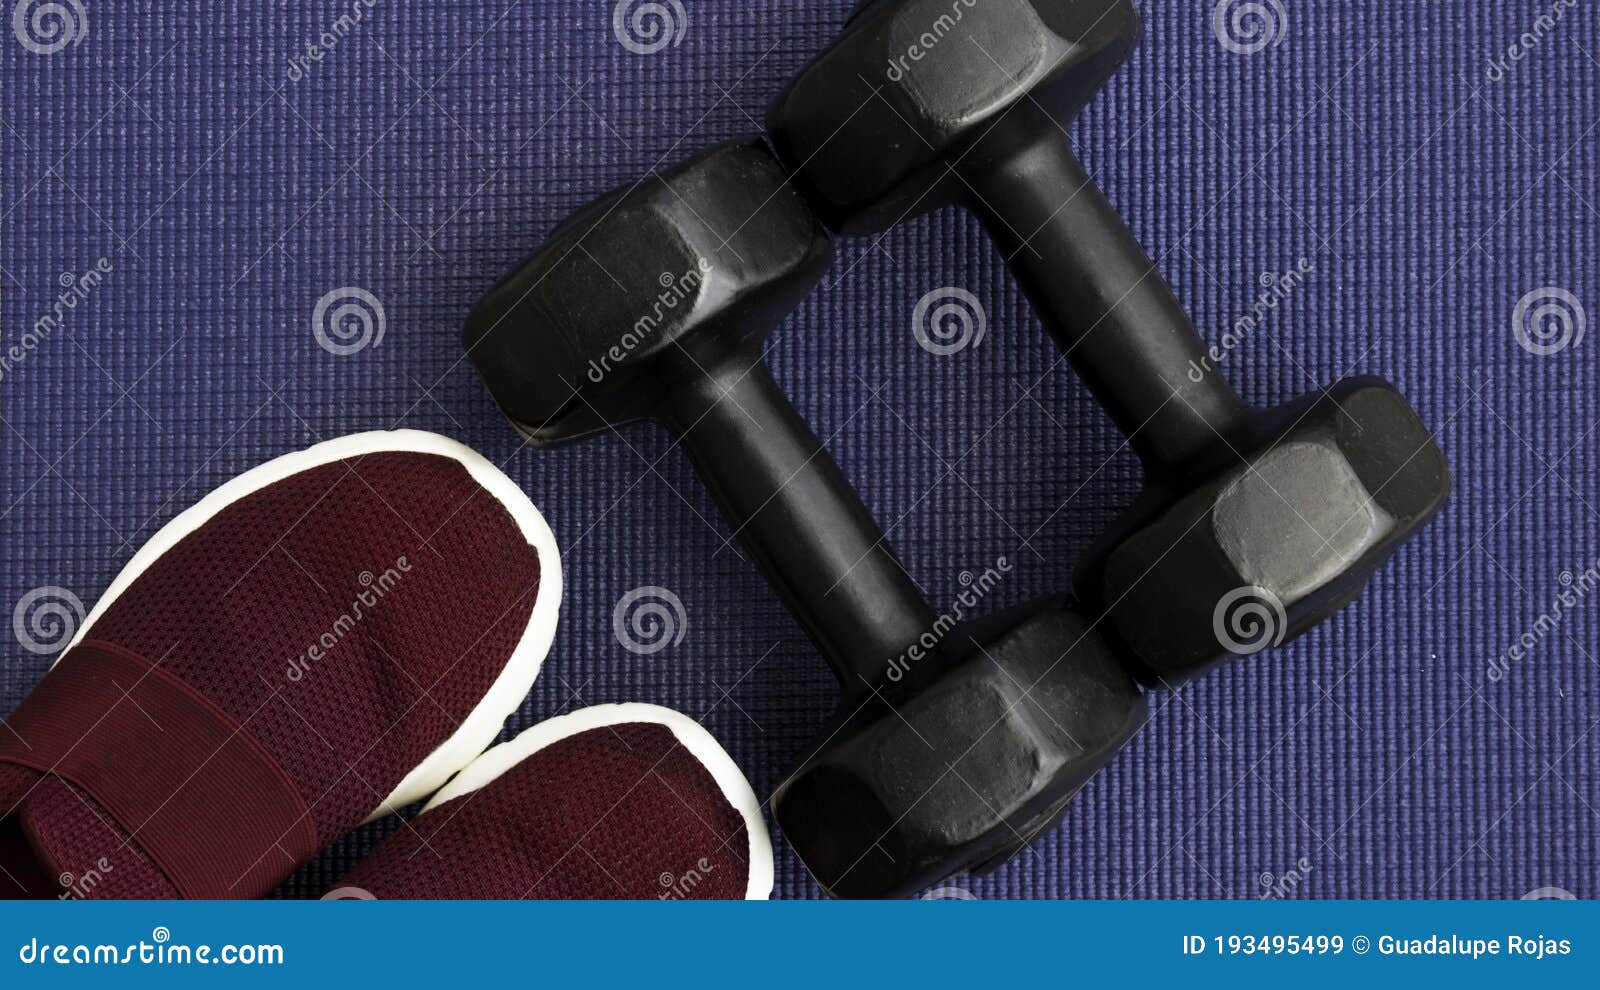 dumbbells and red tennis shoes on a yoga mat, exercise concept